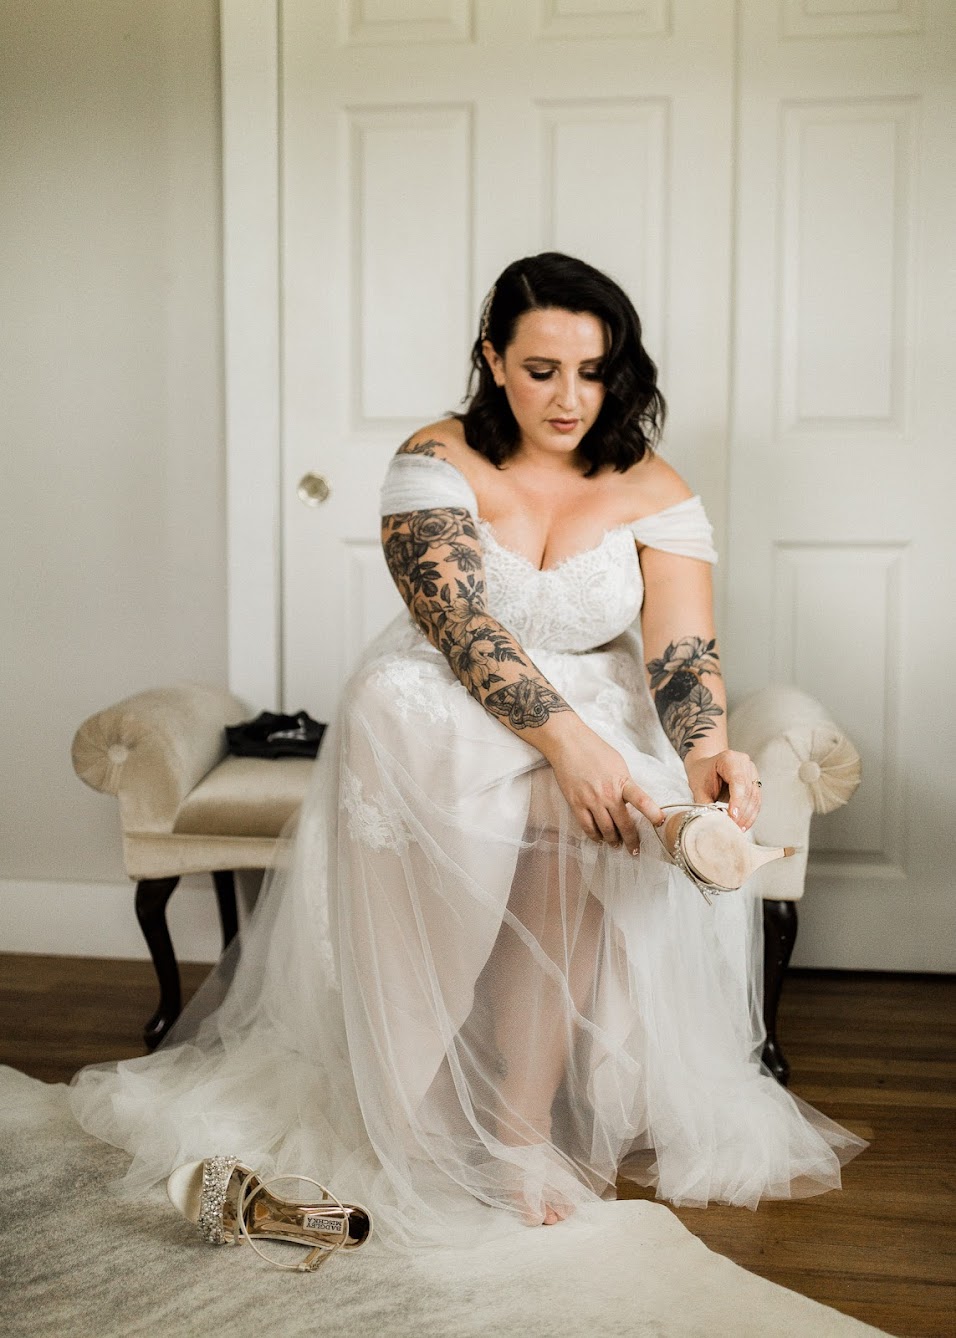 Bride sitting on a vintage bench while putting on her open-toed bridal shoes